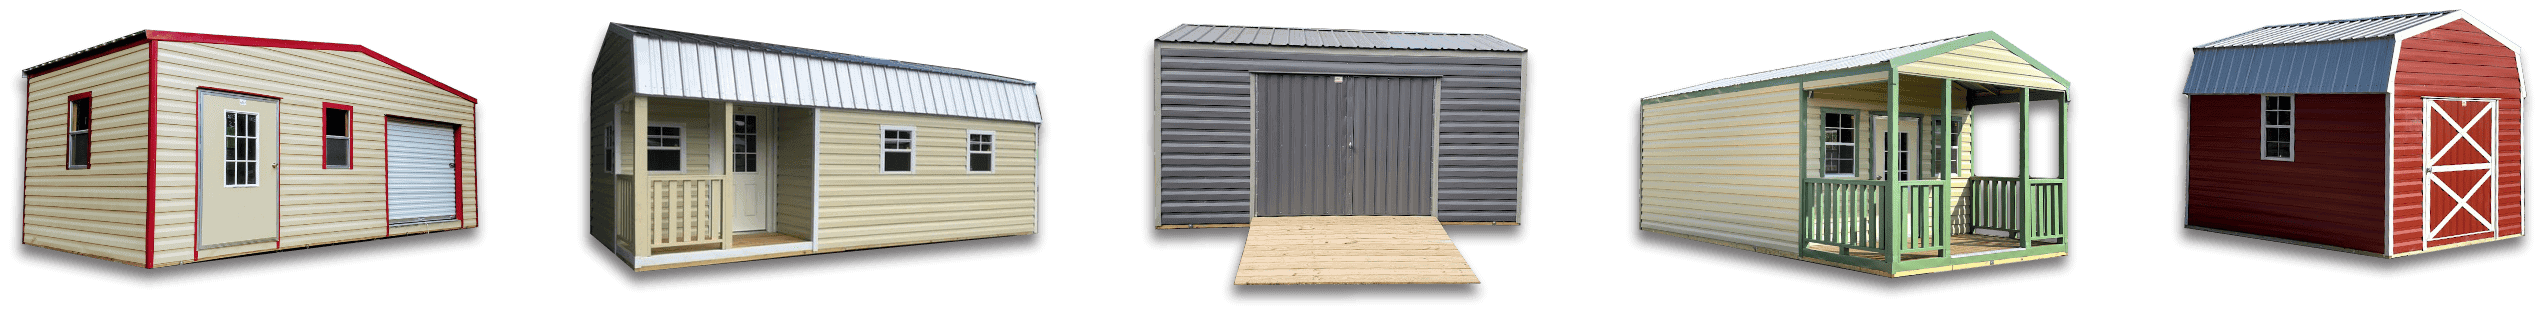 Get your 8x24 sheds for sale today! Robin Sheds offers a variety of shed styles including portable buildings, storage sheds, and outdoor storage buildings. As a trusted shed dealer, we provide top-quality 8x24 options to meet your needs. Visit us at robinsheds.com/8x24-portable-storage-sheds to browse our selection now.